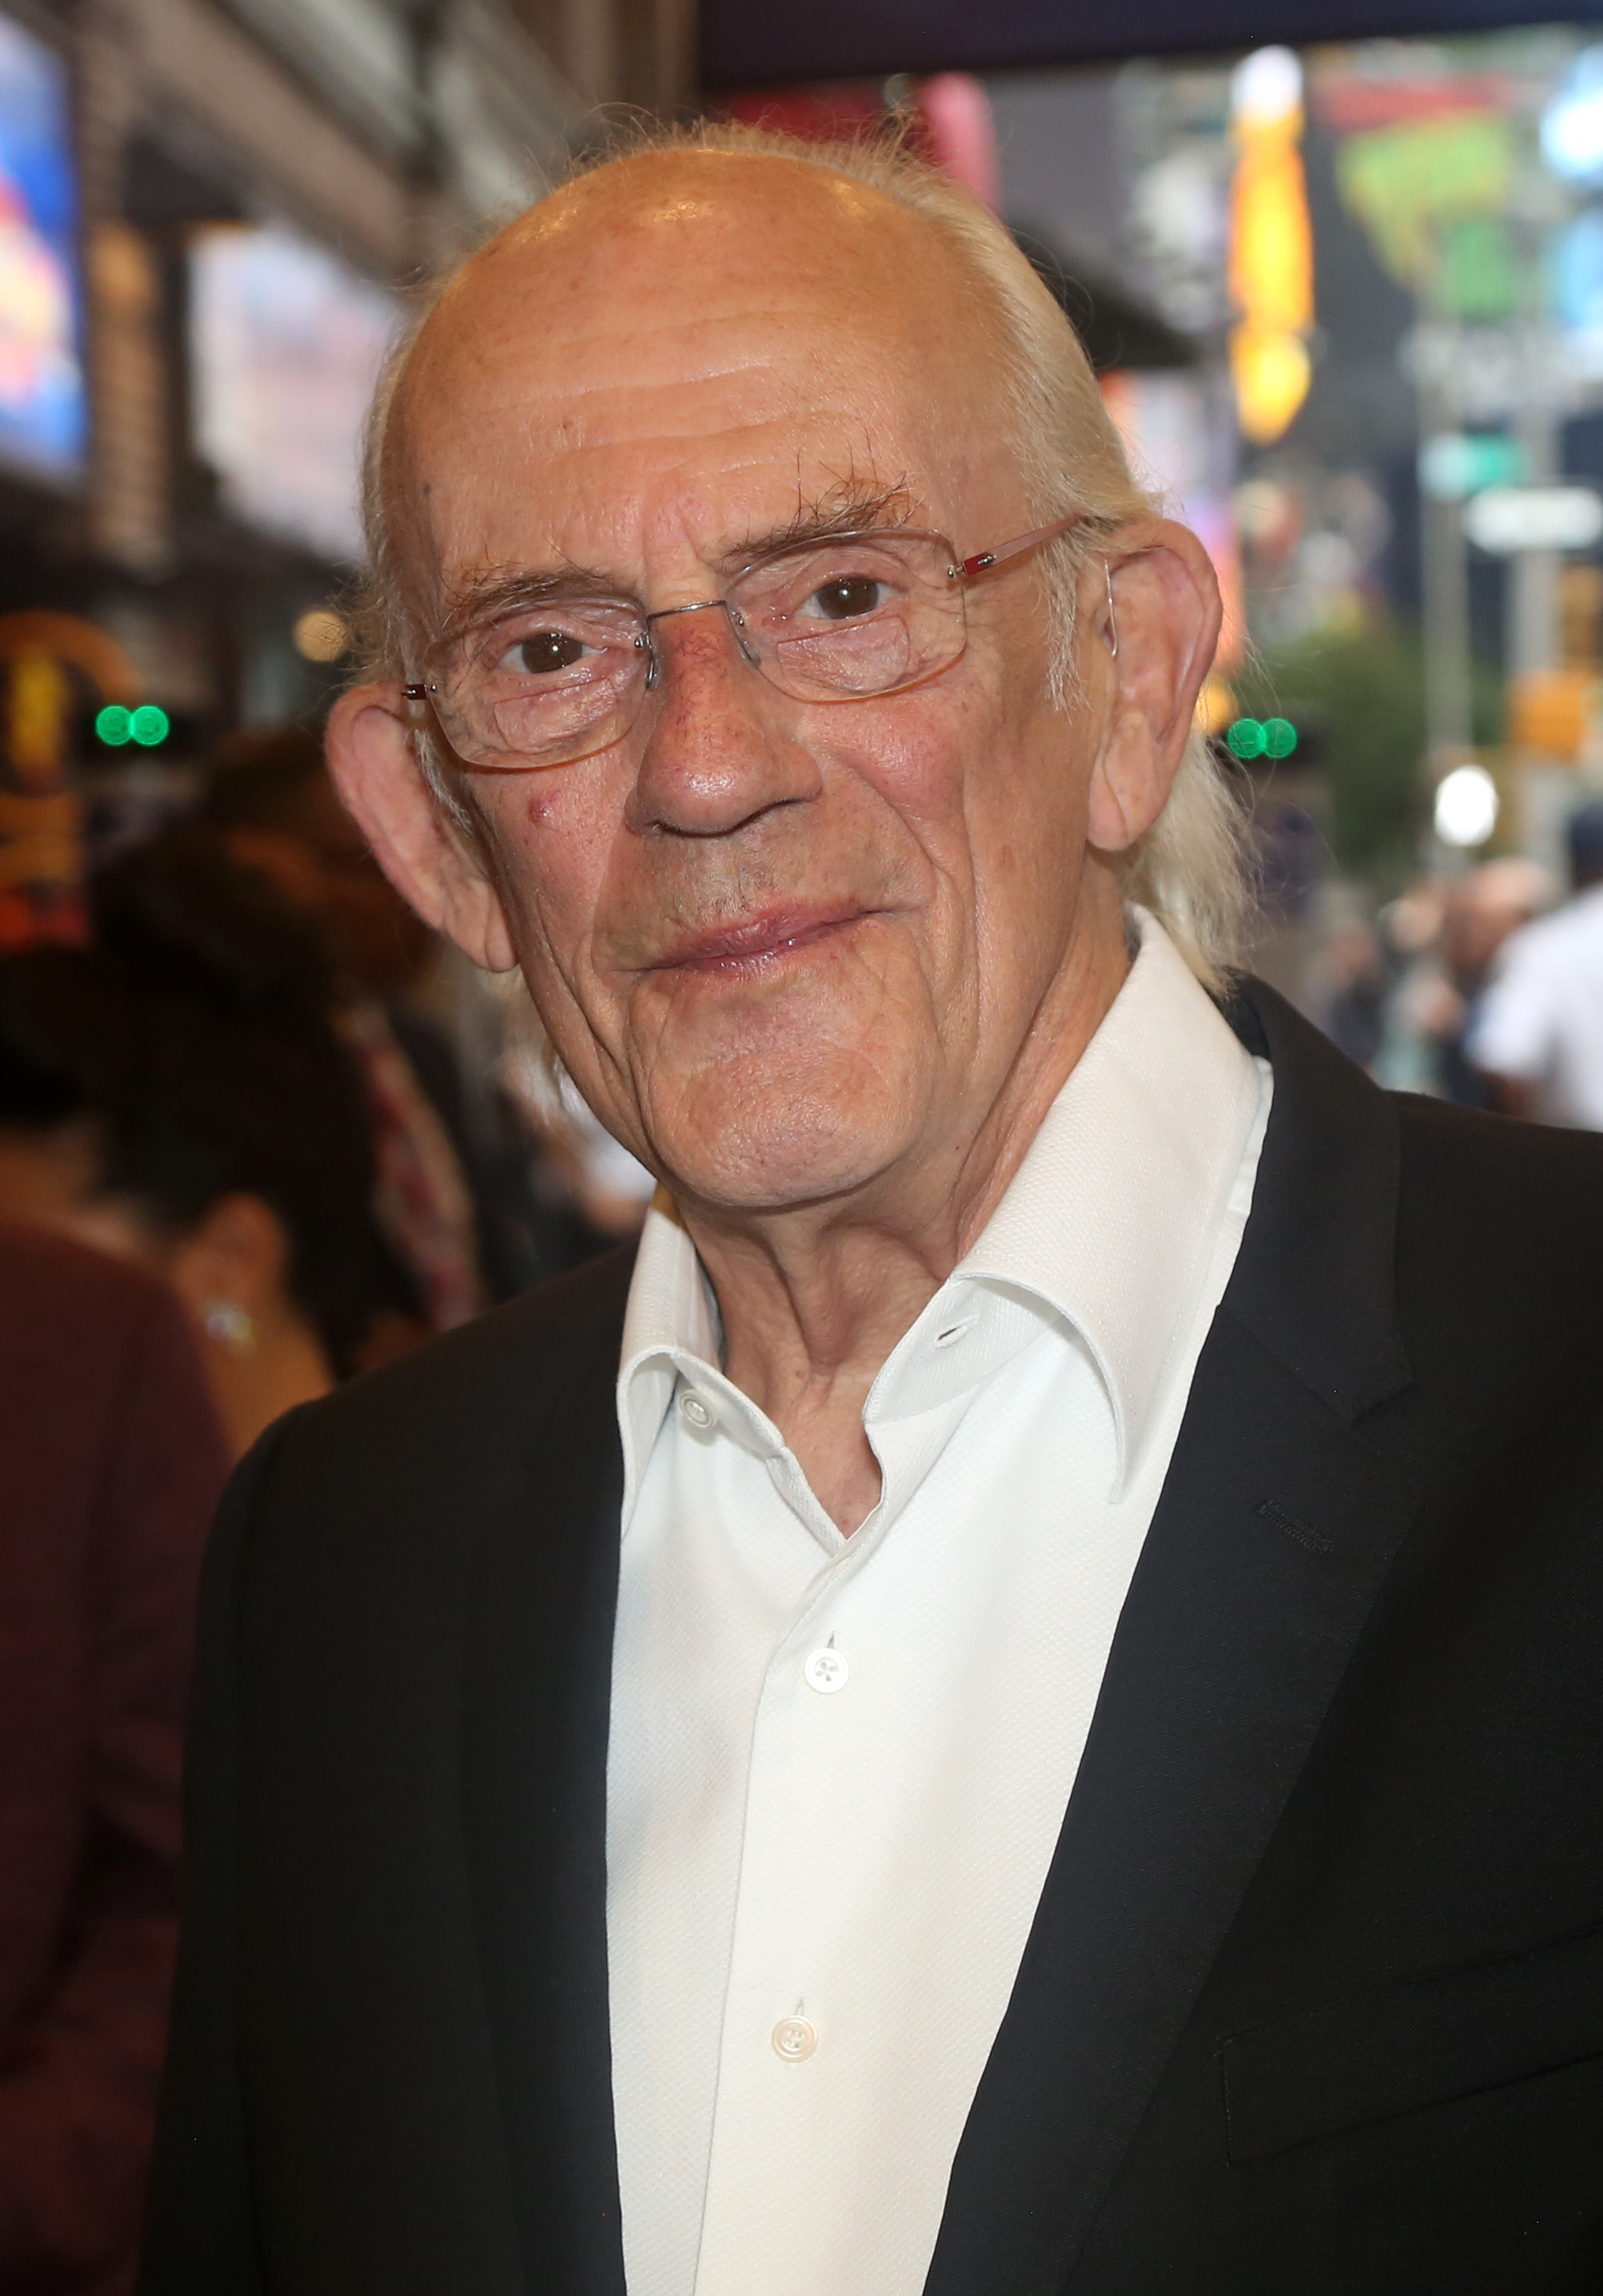 Christopher Lloyd man with glasses in a black suit and white shirt, smiling at an event